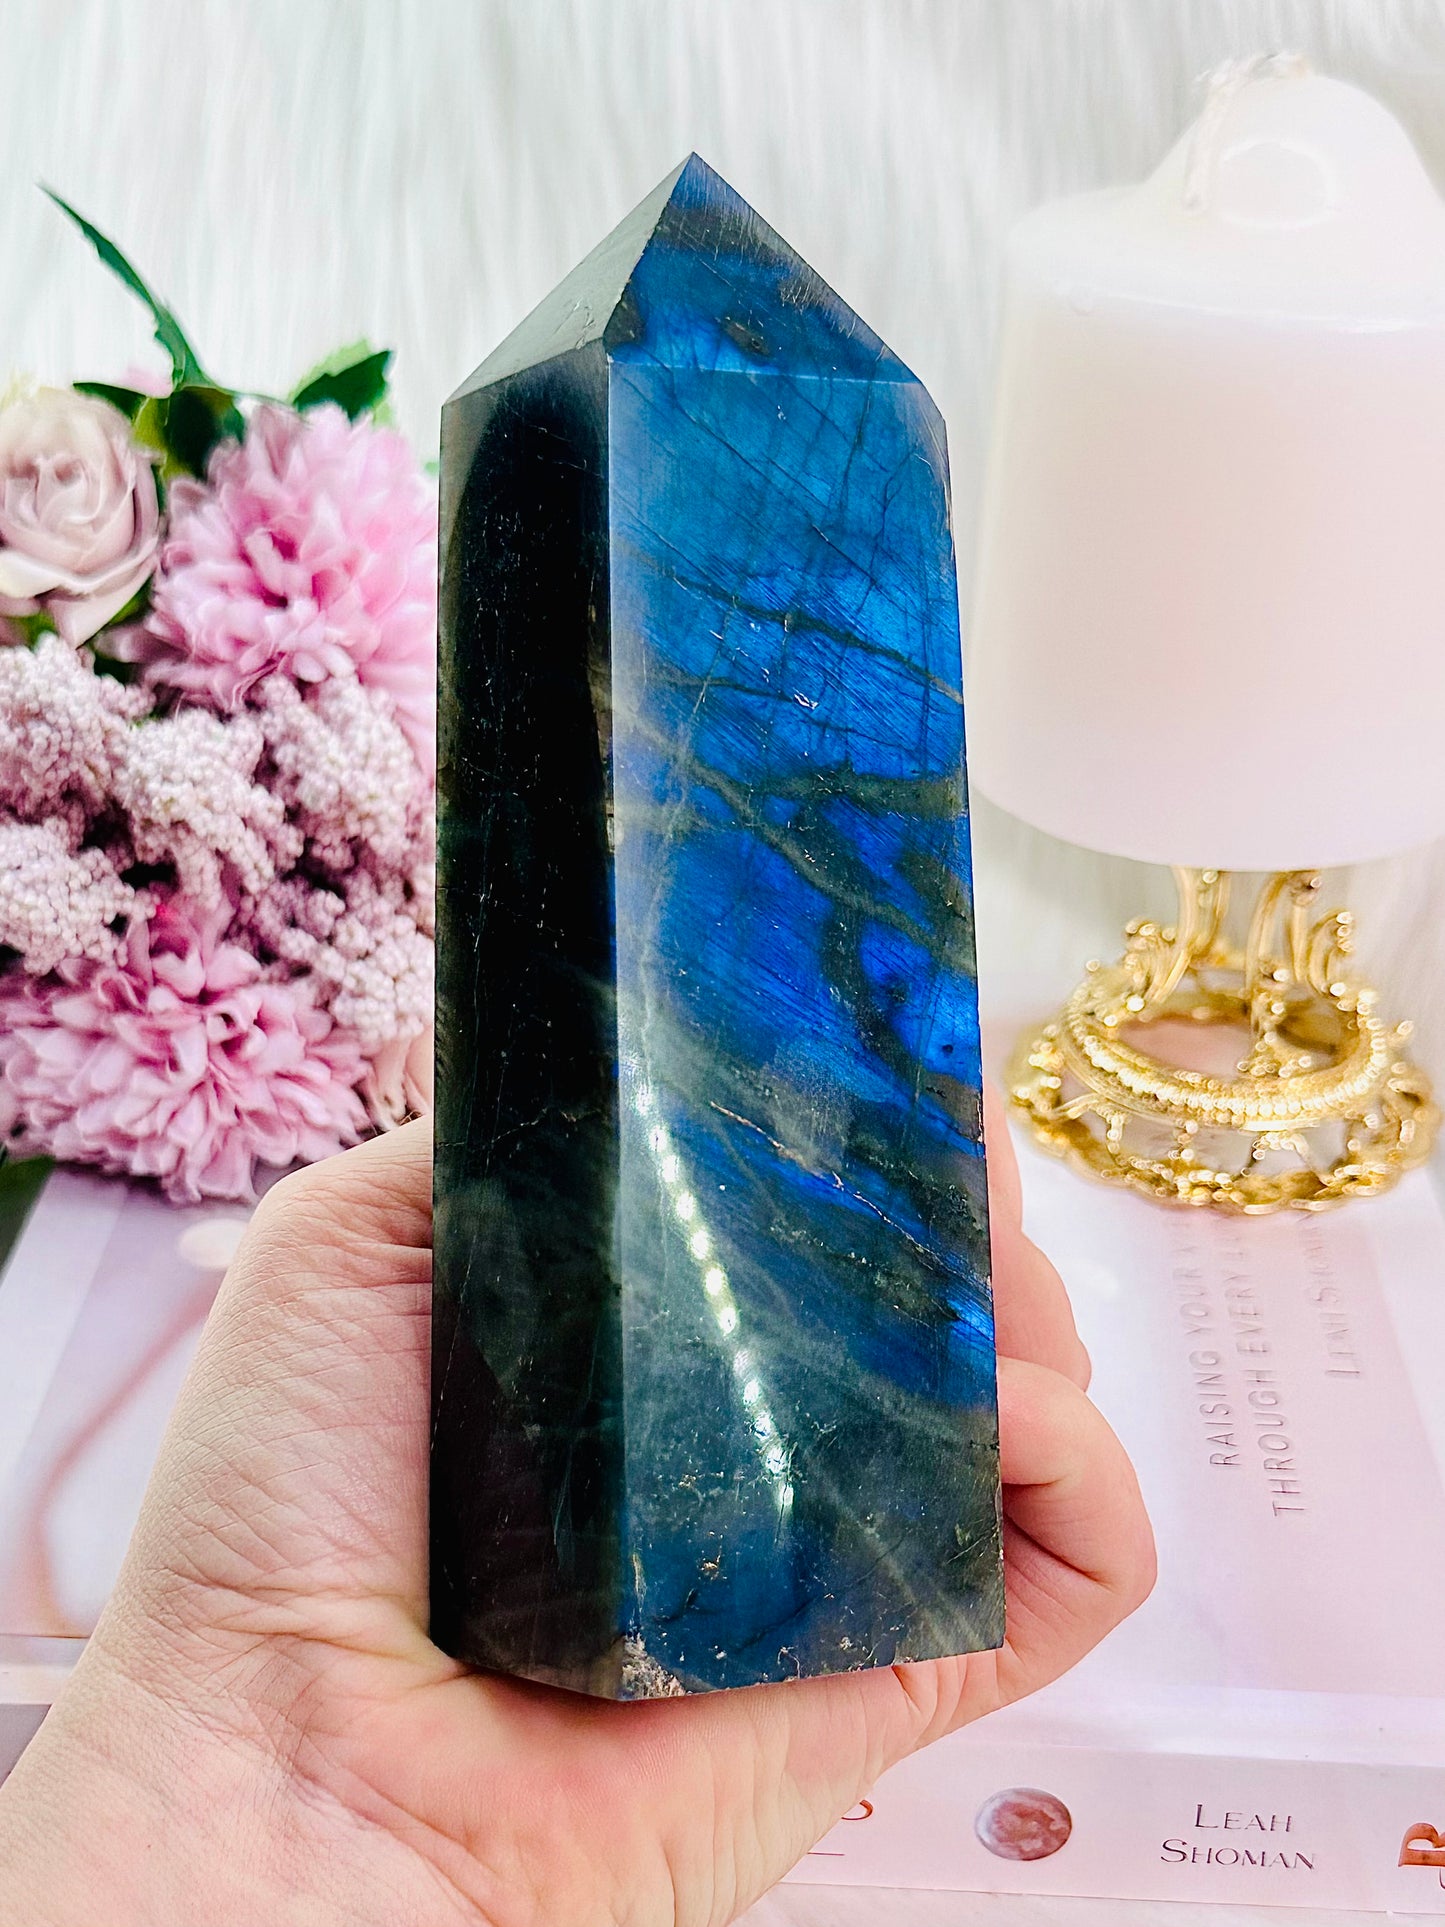 Absolutely Incredible Large 542gram Labradorite Chunky Tower Full of Blue Flash Both Sides